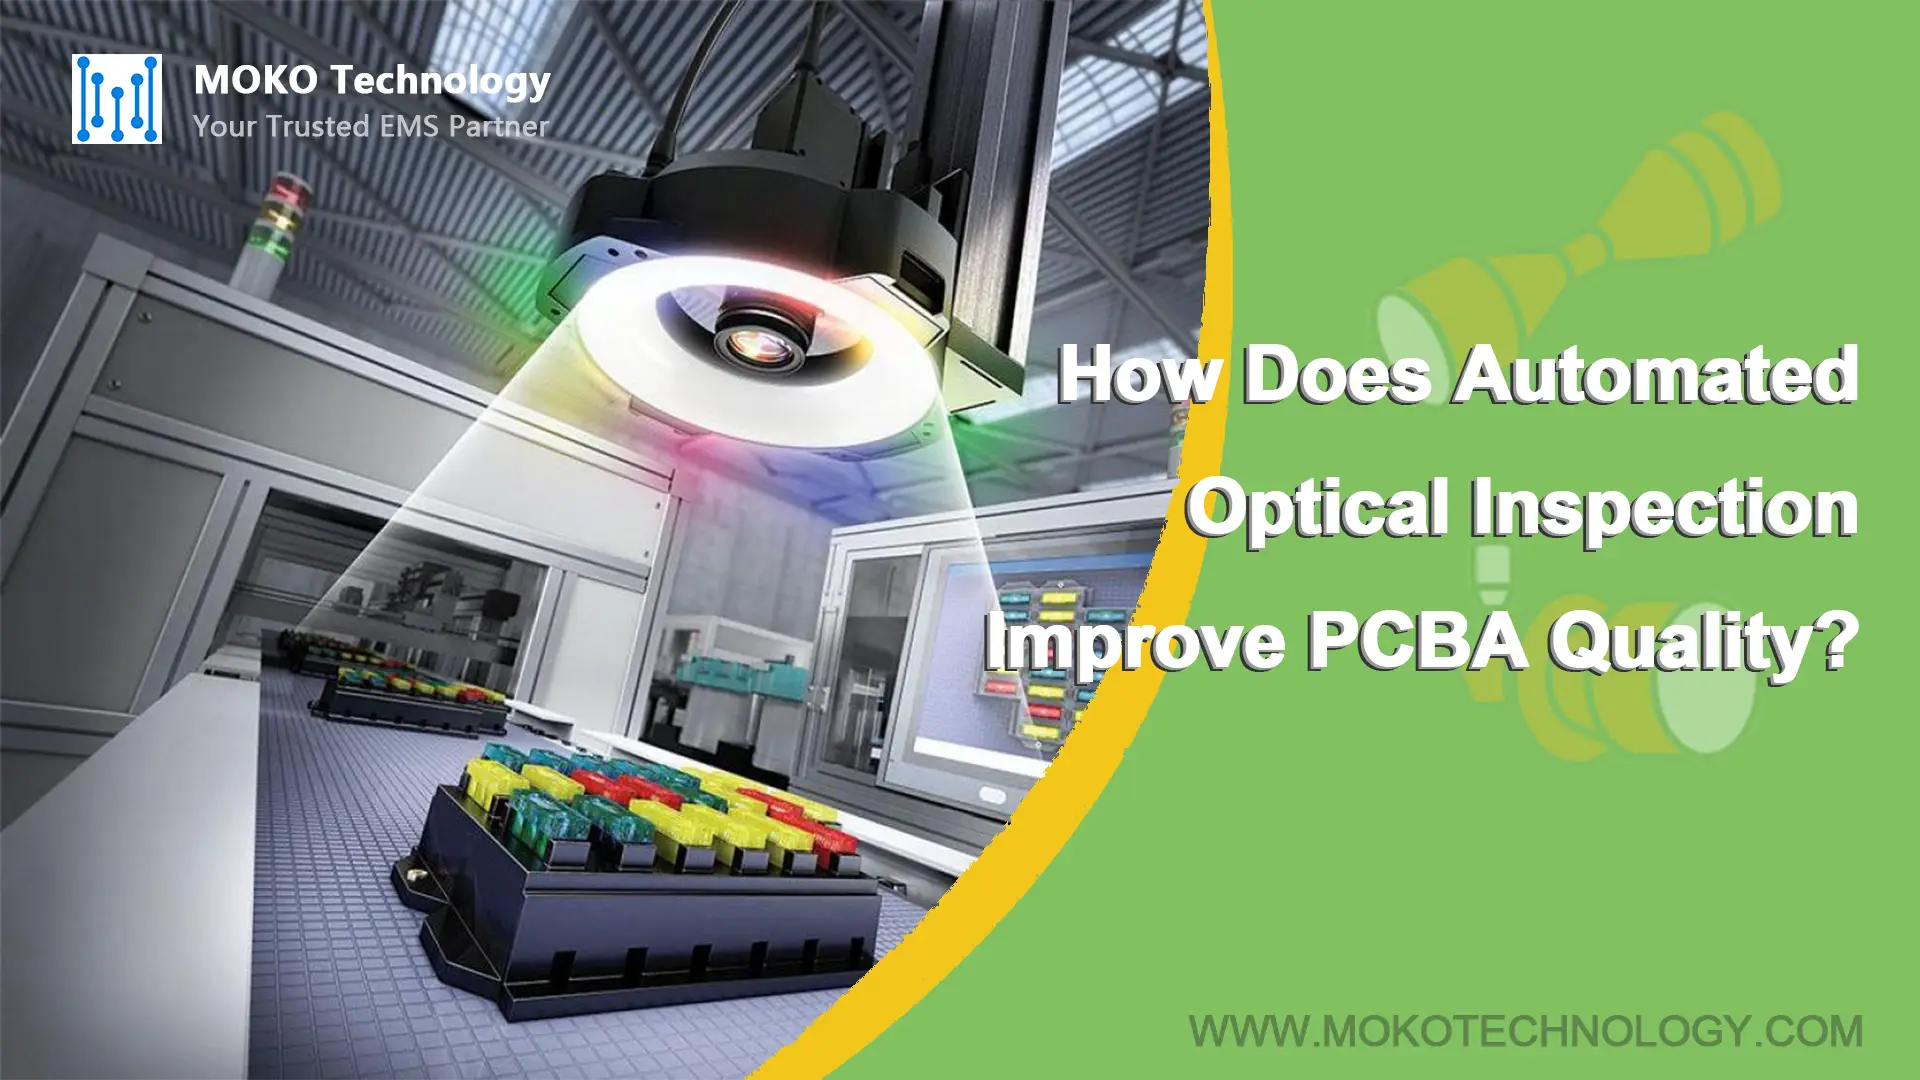 How Does Automated Optical Inspection Improve PCBA Quality